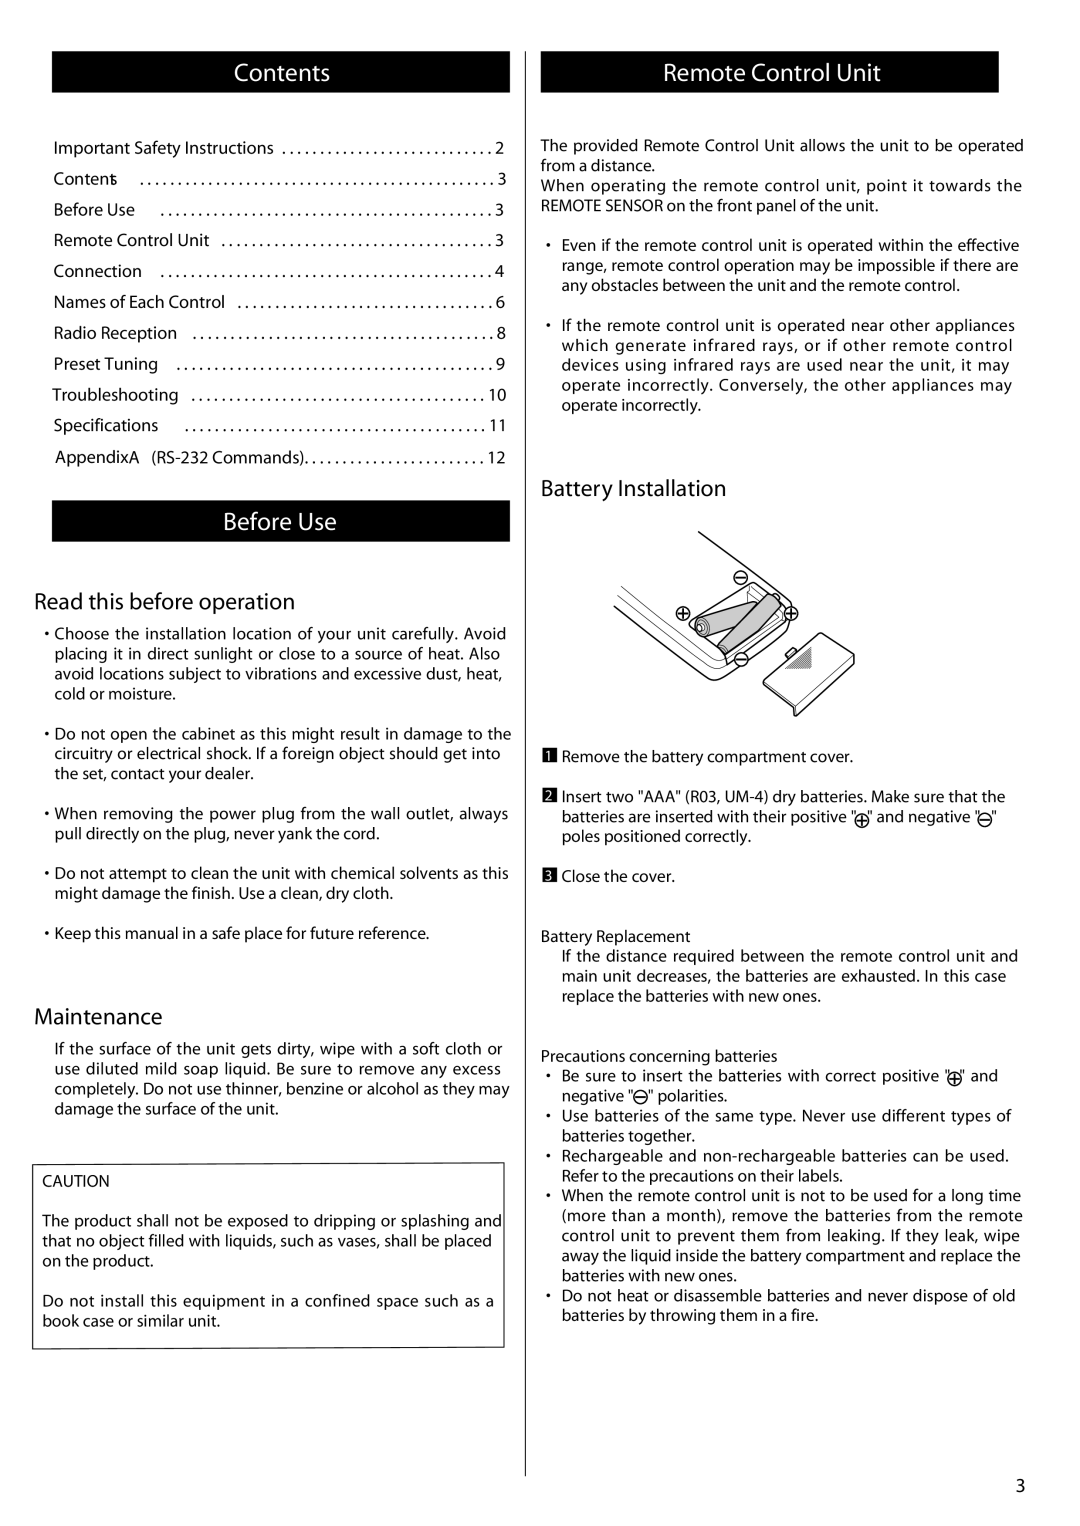 Xantech AM/FM Radio Tuner owner manual Contents, Before Use, Remote Control Unit, Read this before operation, Maintenance 